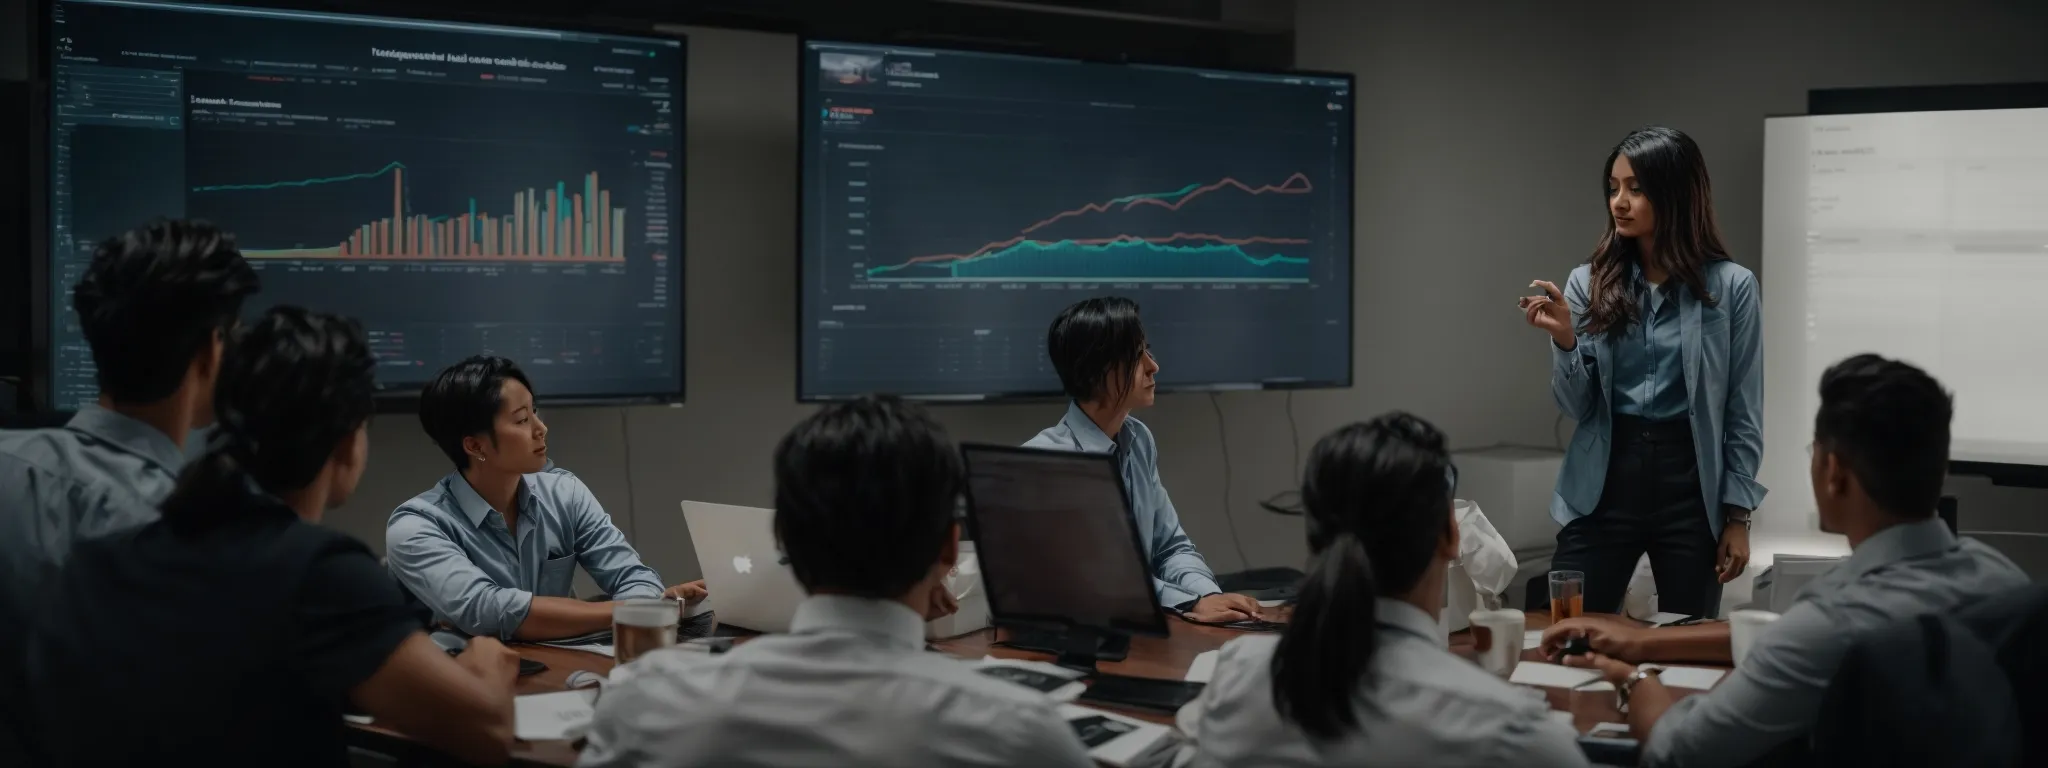 a marketer explaining growth strategies to a team in front of a computer displaying analytics graphs.